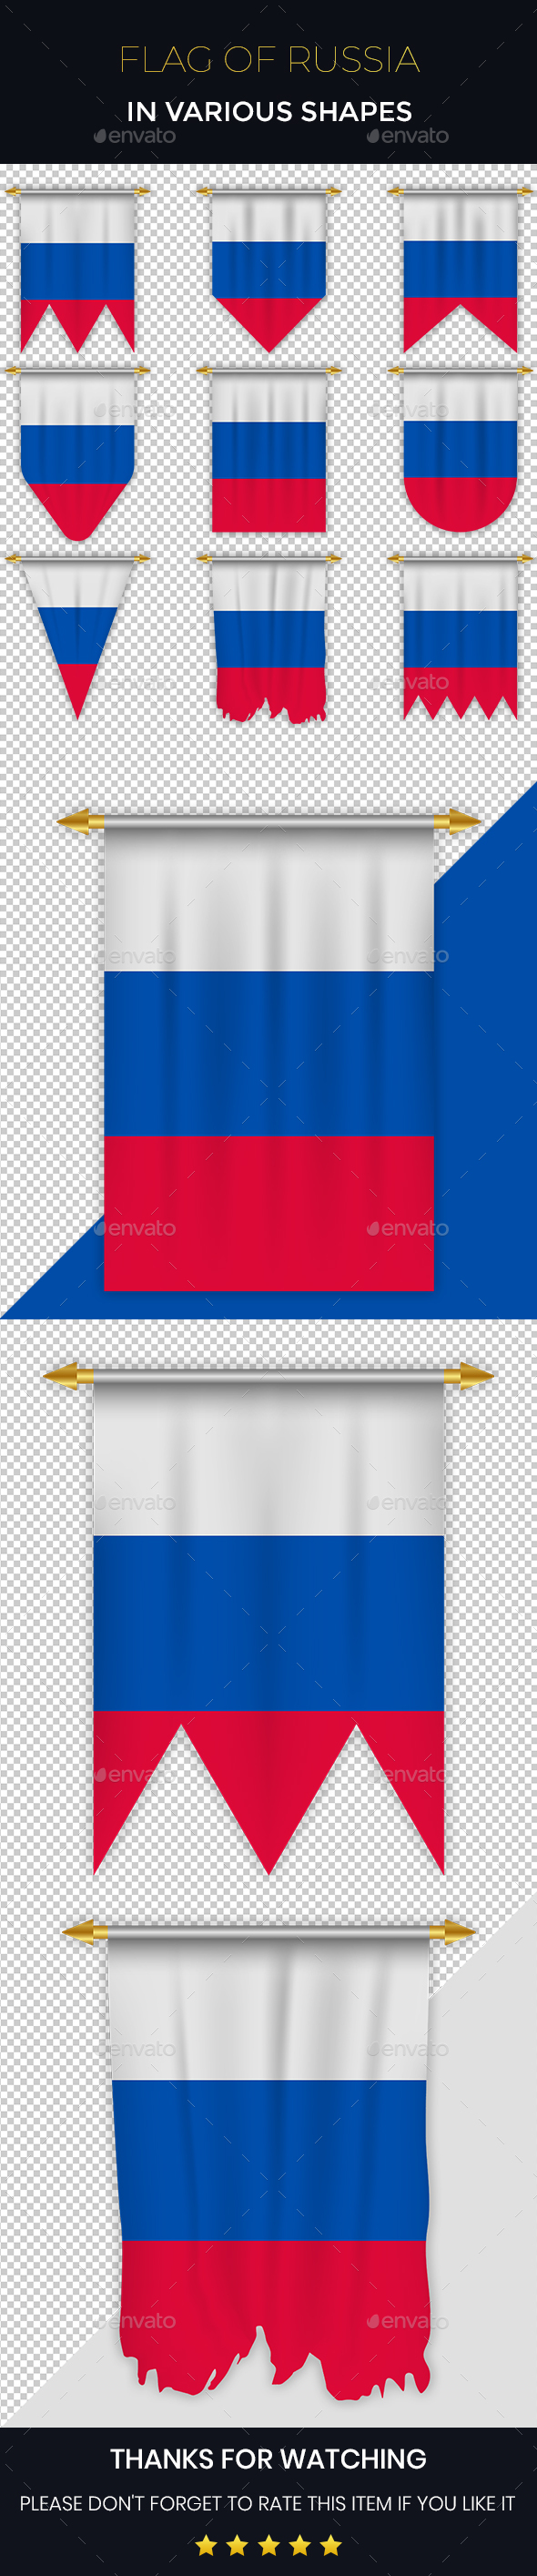 Russia Flag in Various Shapes